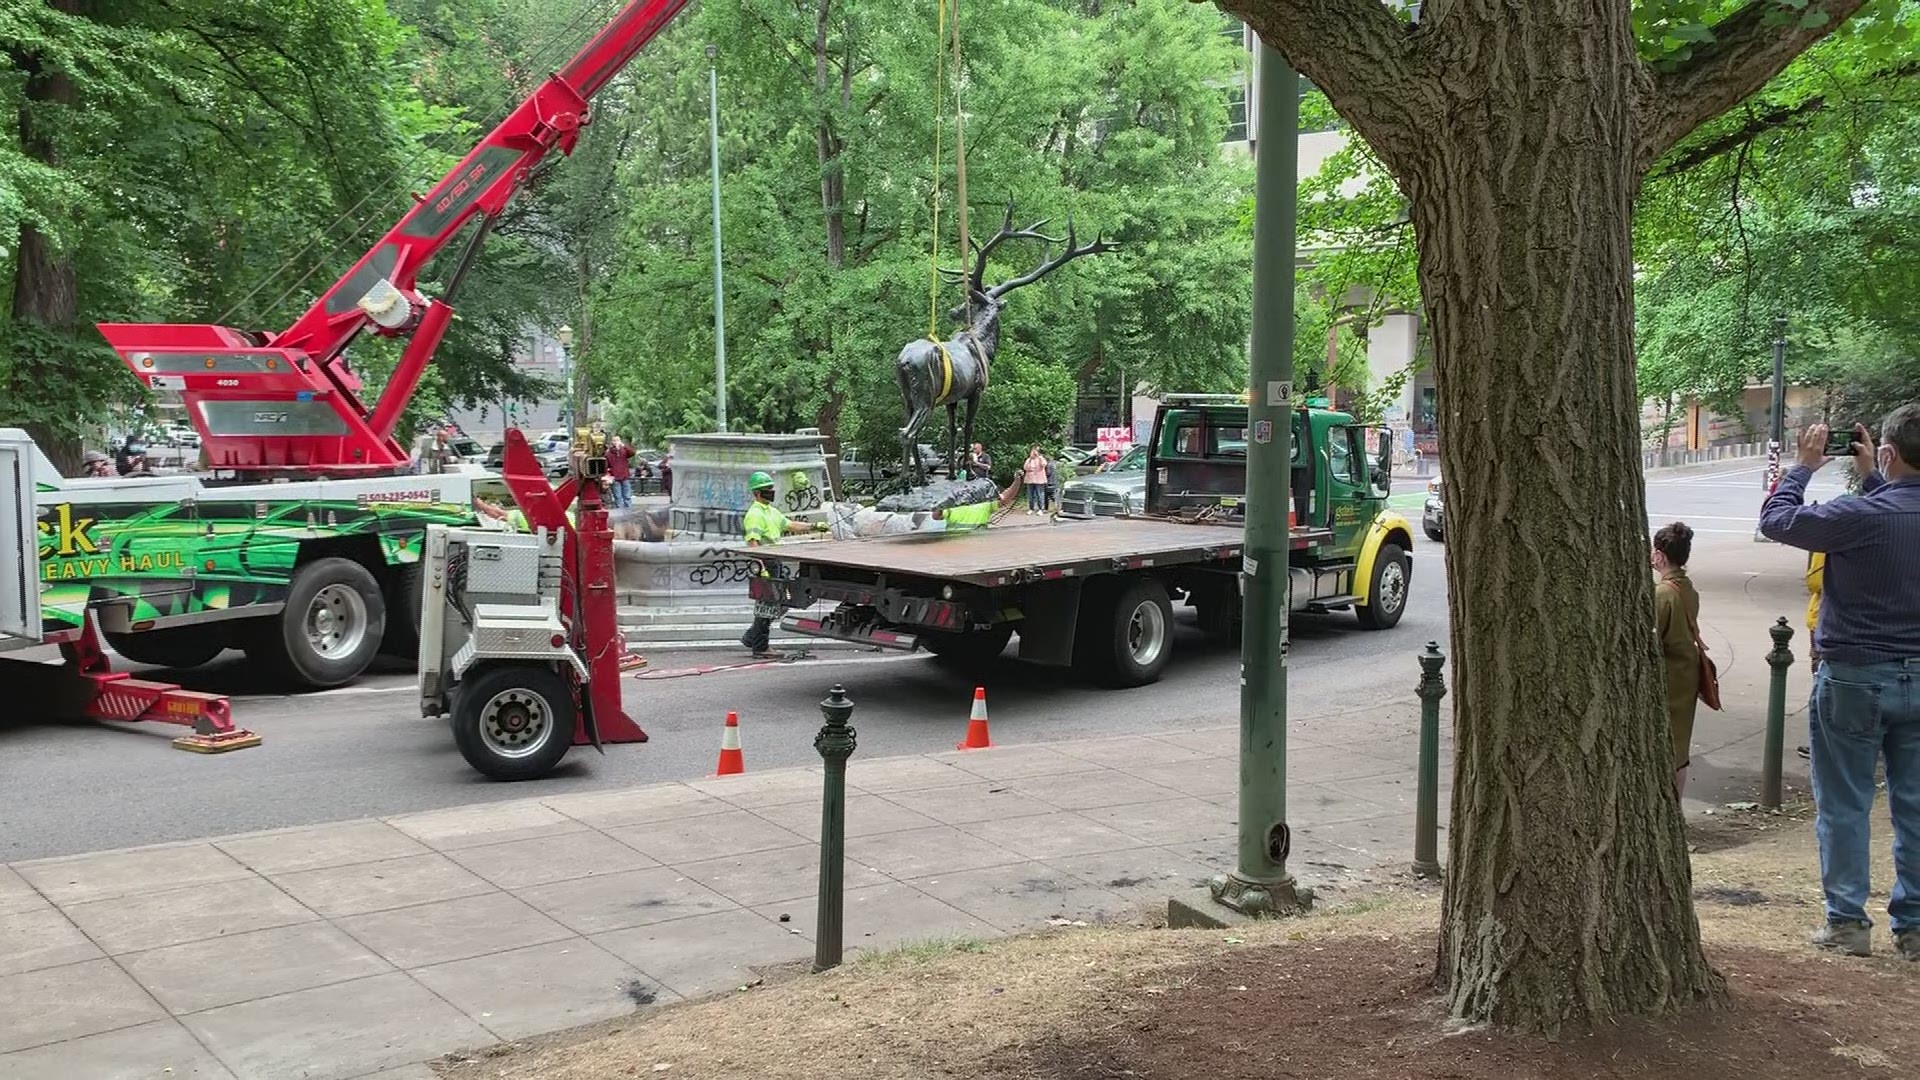 The elk statue on SW Main Street in downtown Portland was removed after repeated acts of vandalism made it a safety hazard, the Regional Arts Council determined.